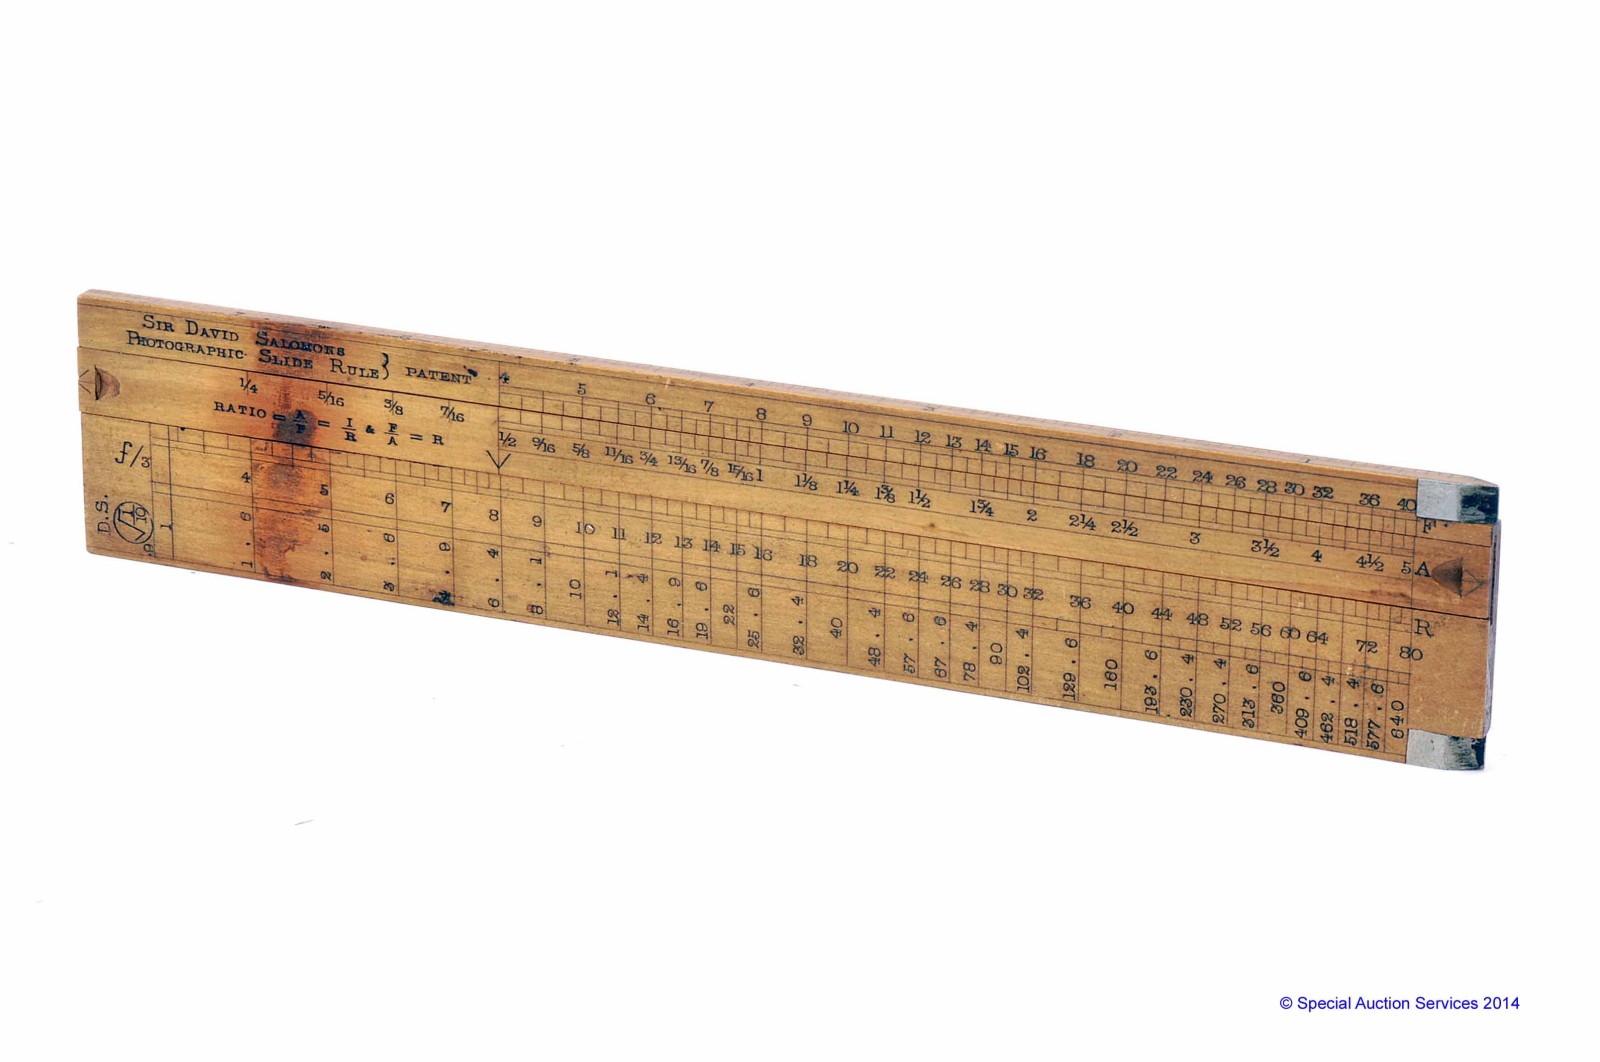 A Sir David Salomons boxwood Photographic Slide Rule, with brass fittings, G, some staining to top